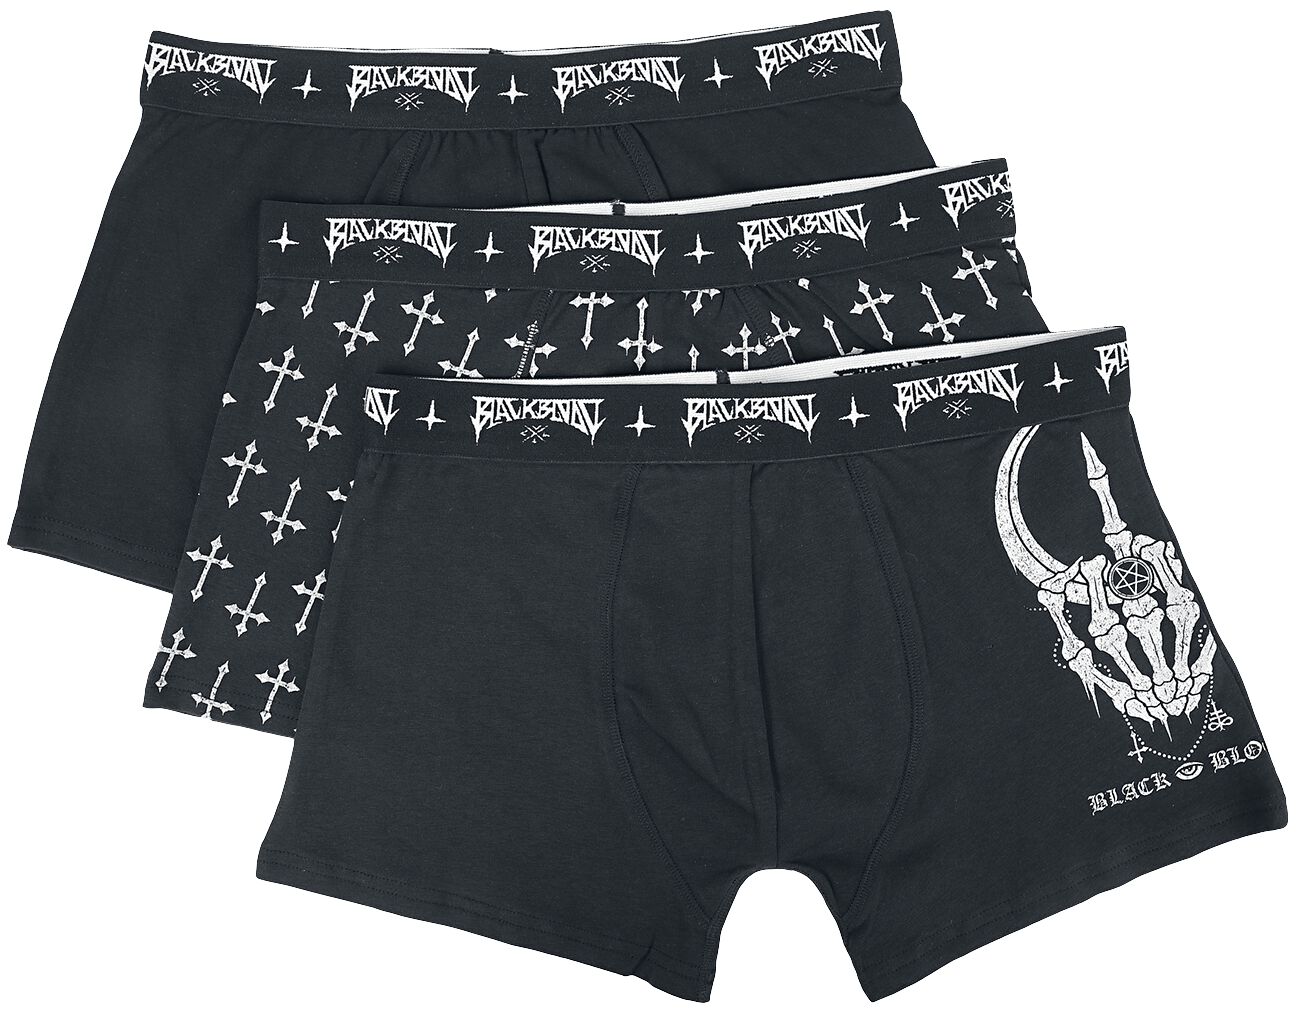 Black Blood by Gothicana Boxer Shorts with Gothic Motifs Boxers black